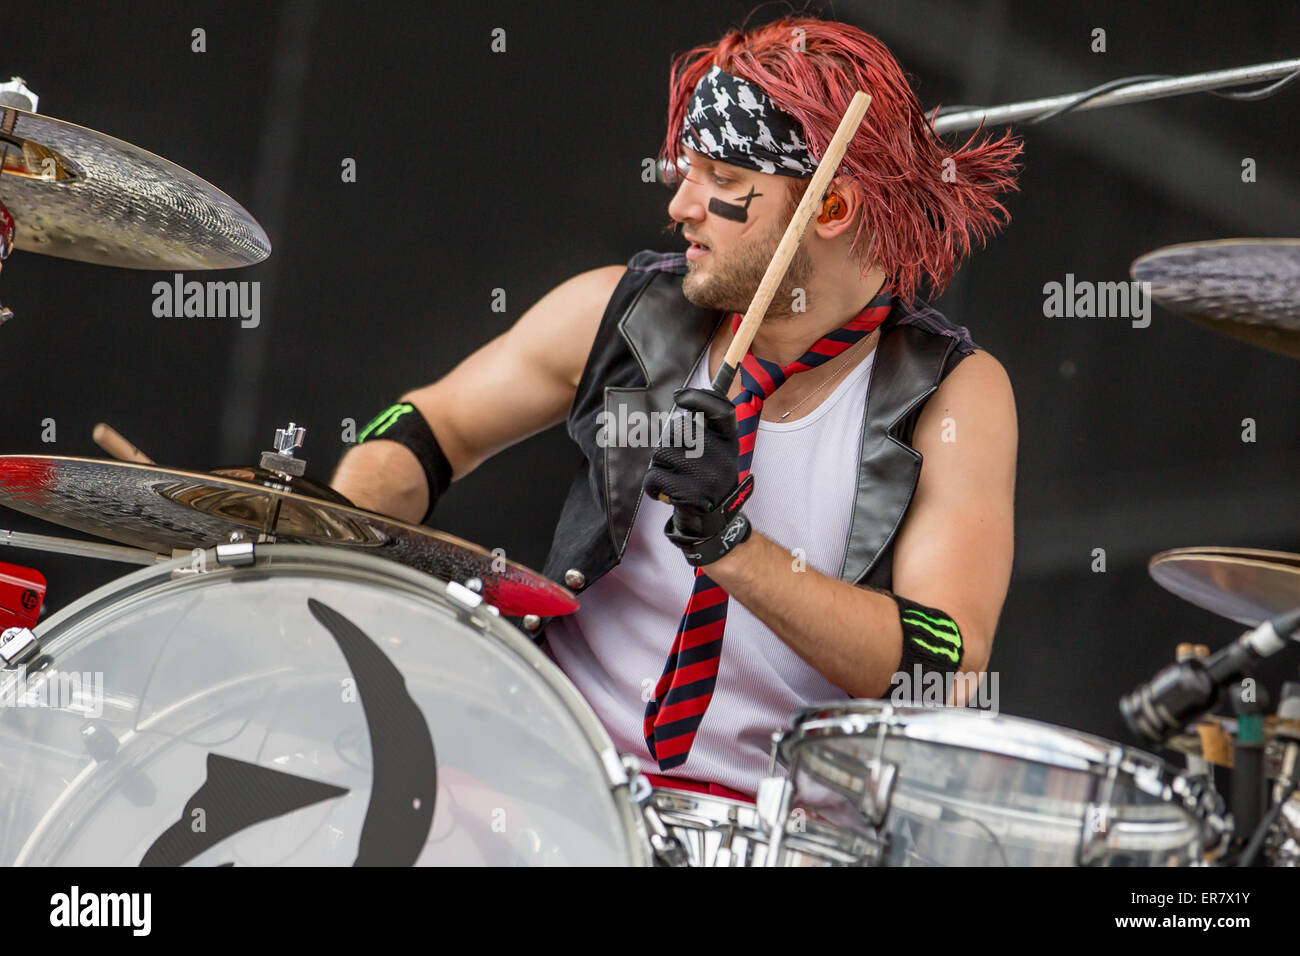 Columbus, Ohio, USA. 17th May, 2015. HALESTORM performs on the final day of the 2015 Rock On The Range Festival at Maphre Stadium in Columbus Ohio on May 17th 2015 © Marc Nader/ZUMA Wire/Alamy Live News Stock Photo